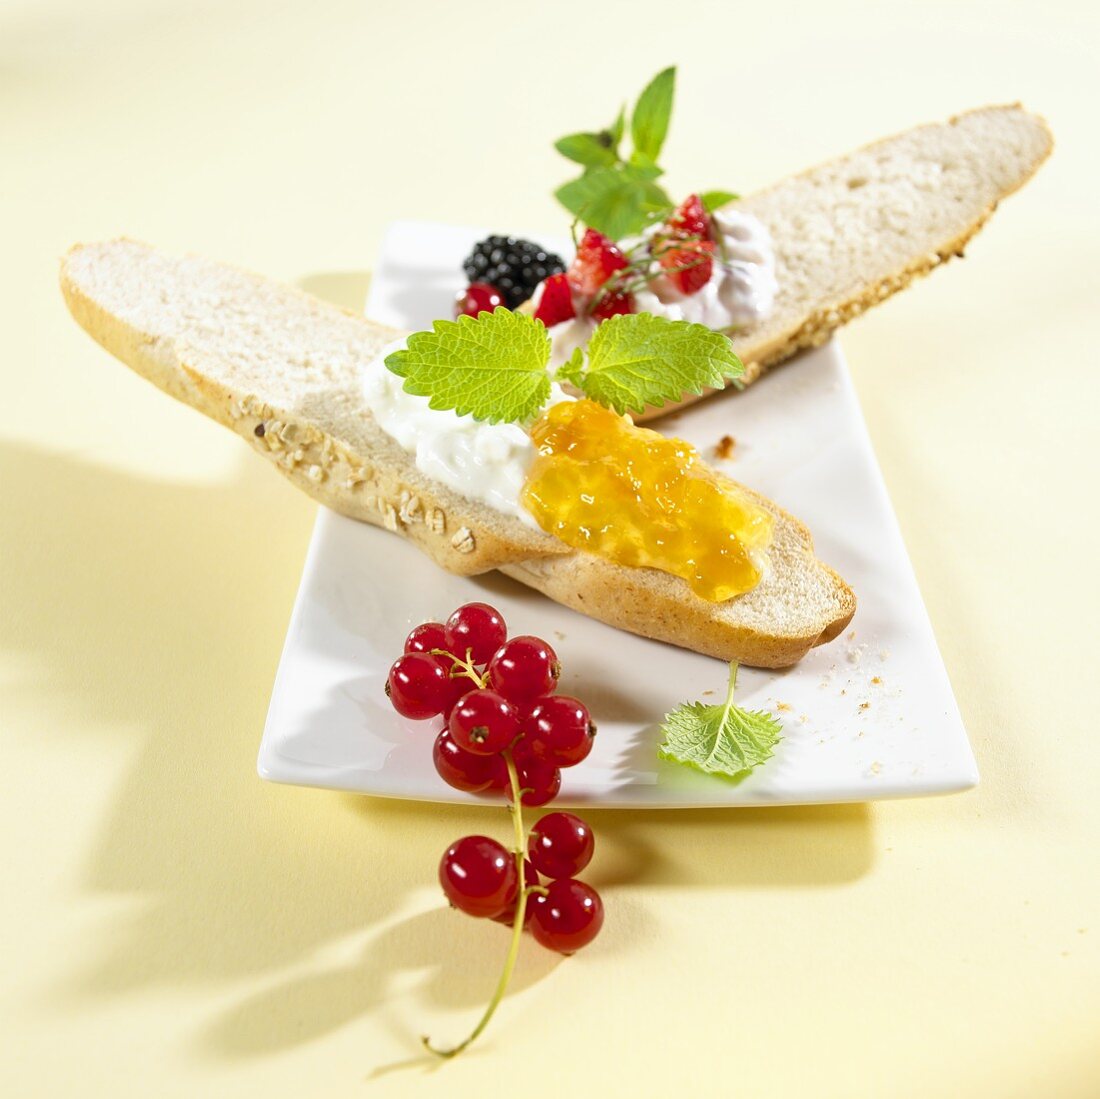 Grain baguette topped with jam, quark and berries